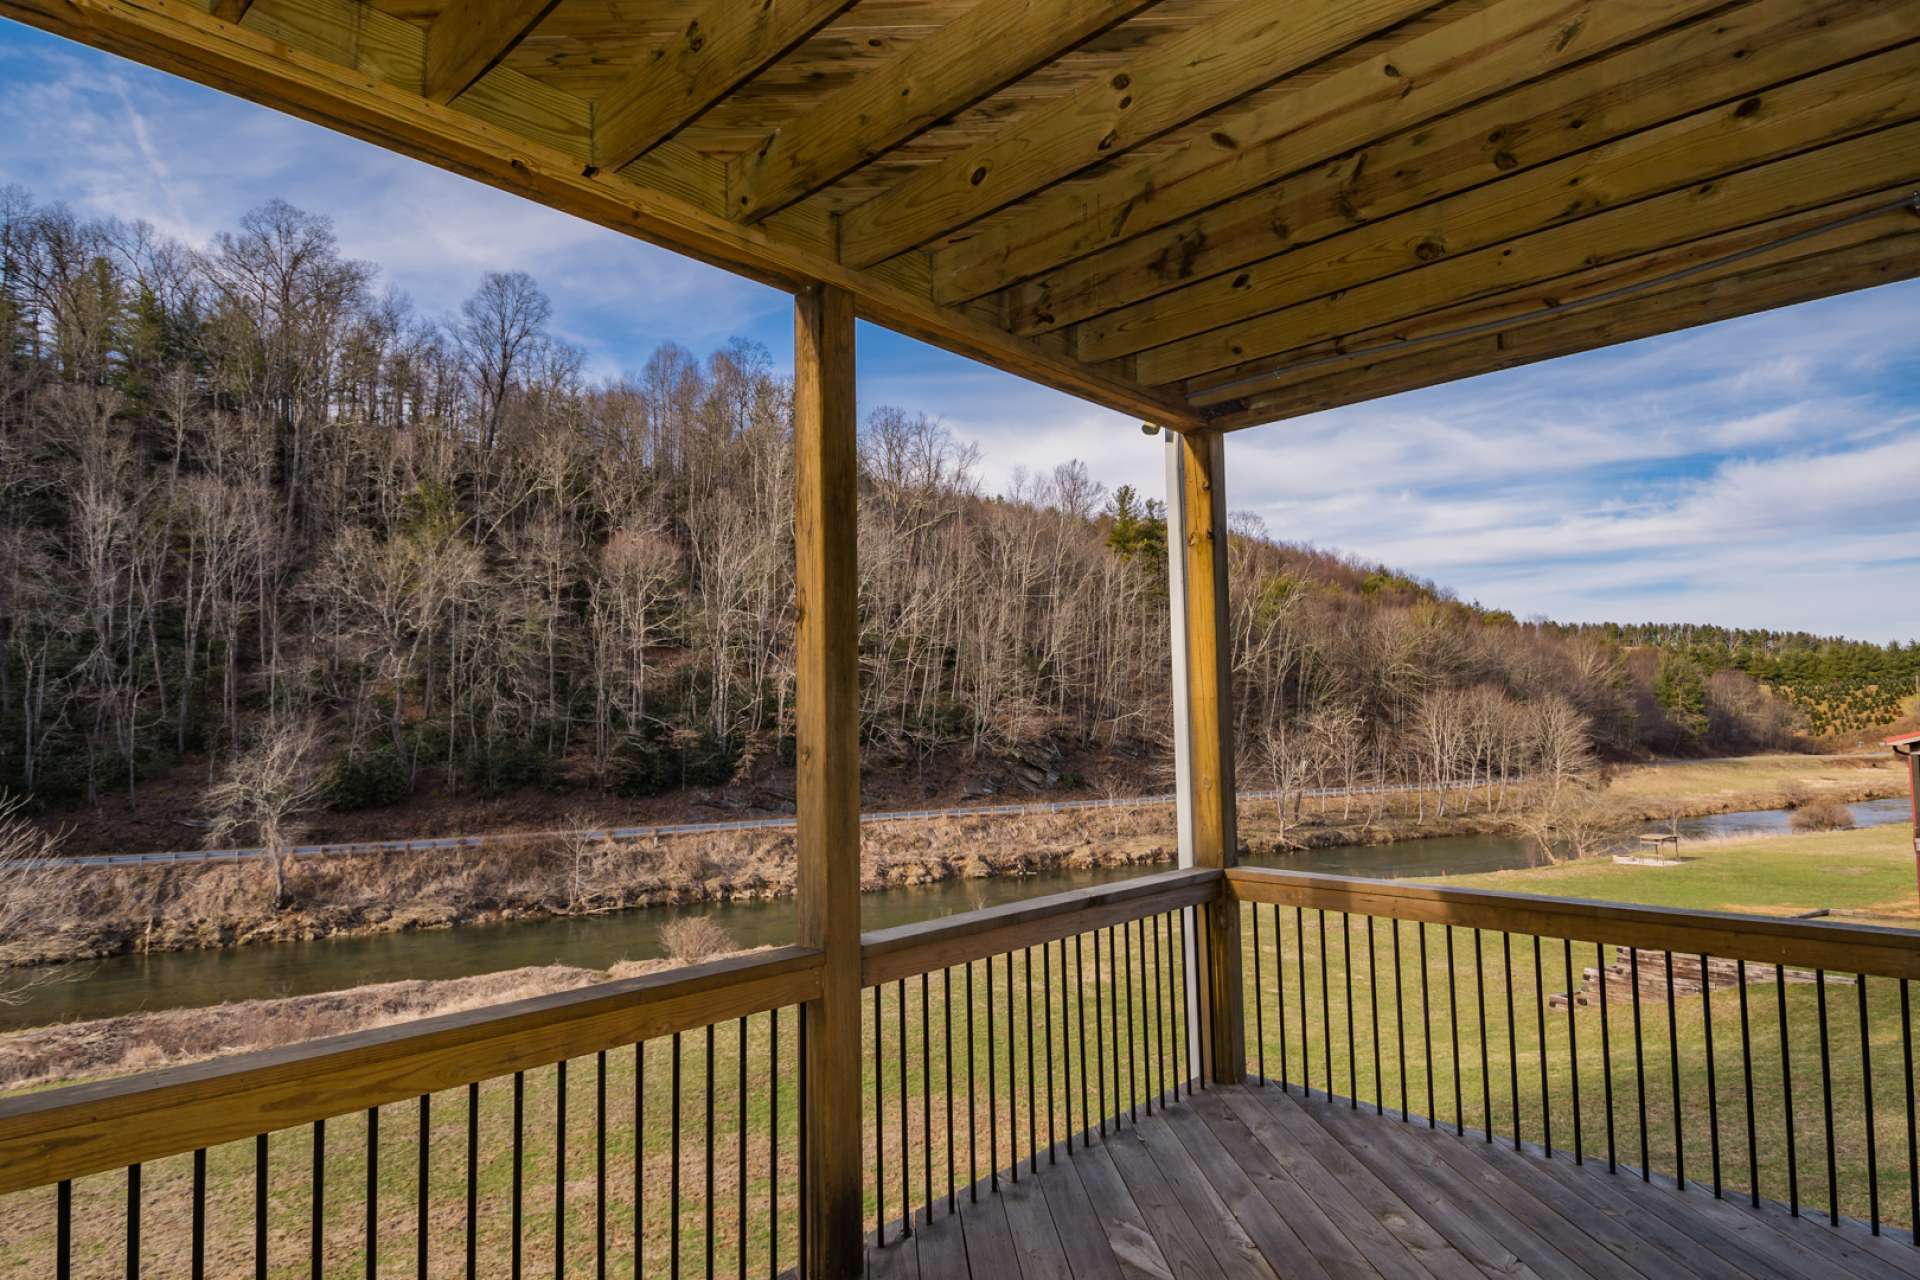 Relax on the covered back decks and enjoy the New River as it slowly flows by the back lawn.